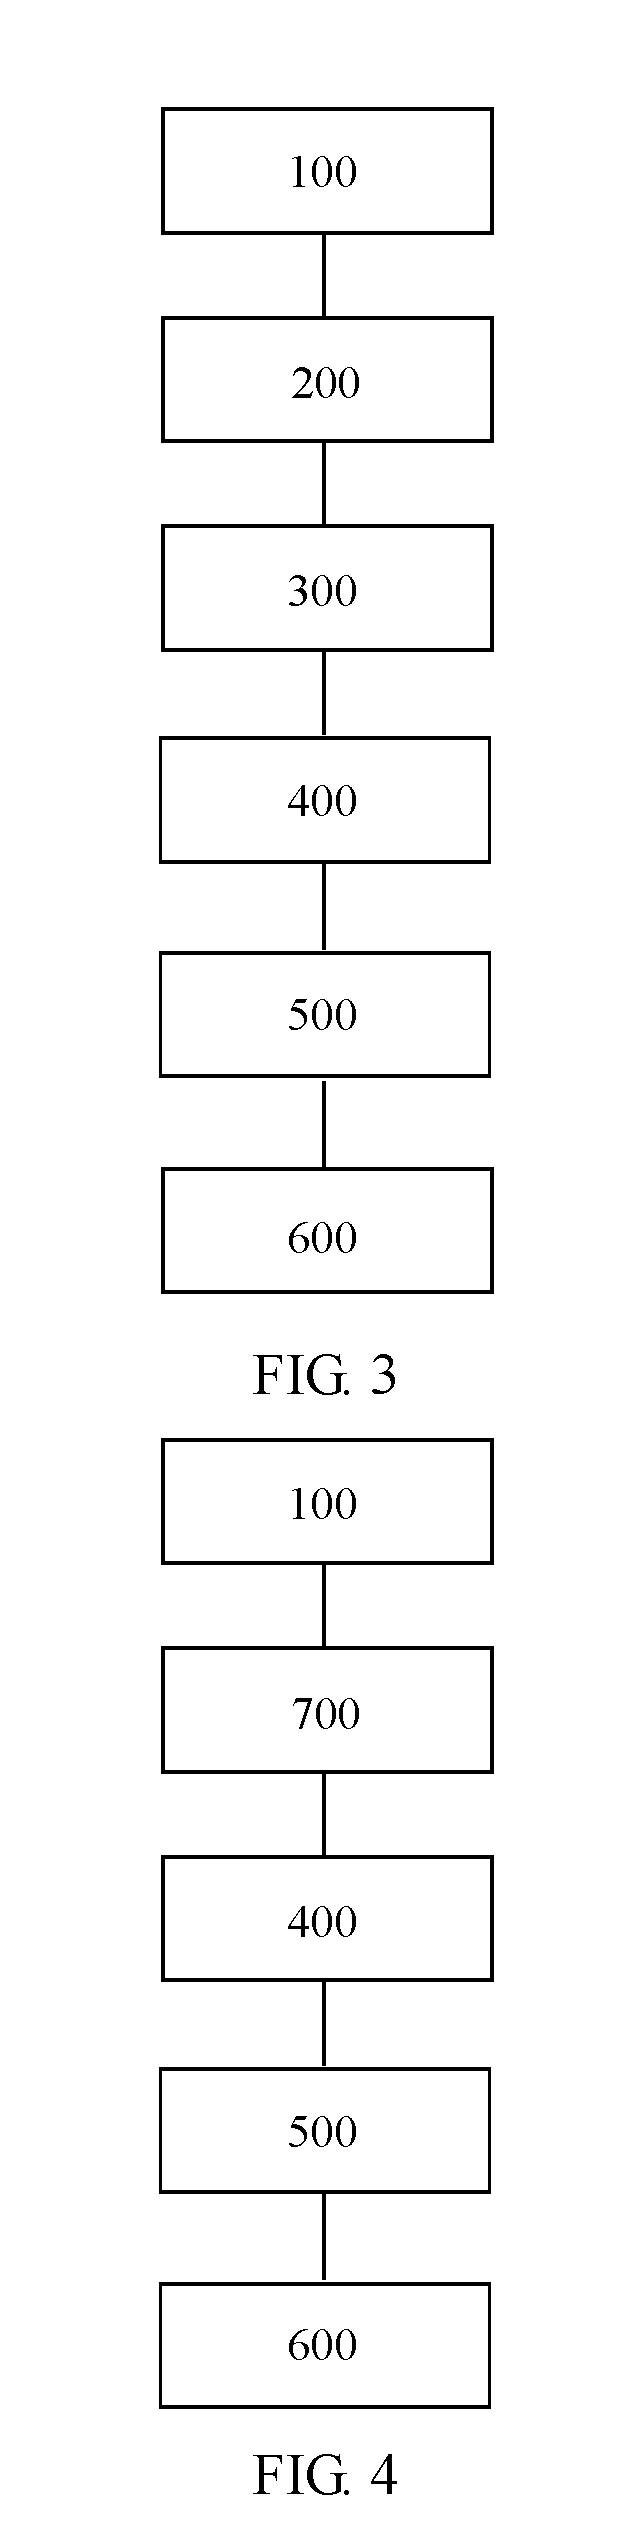 Control method, apparatus and system for bicycle management system